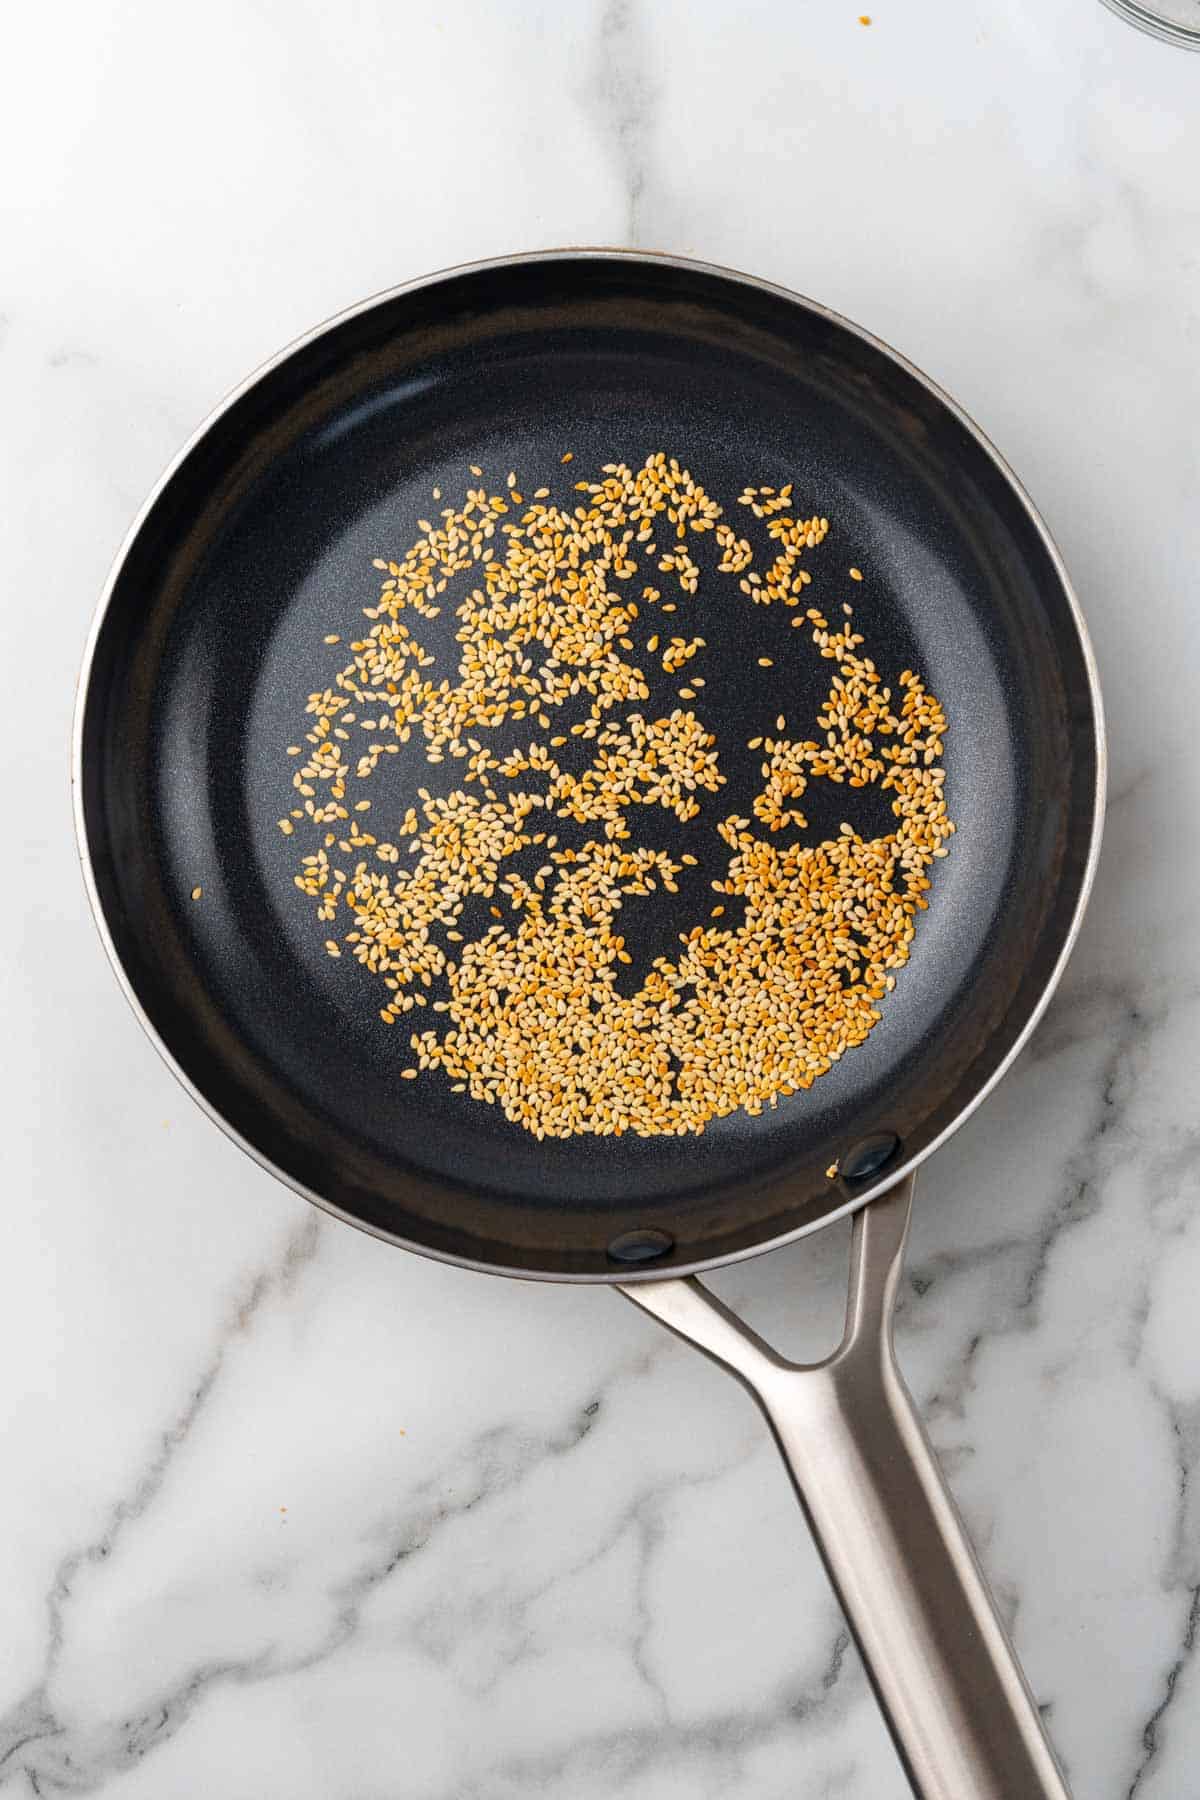 Sesame seeds in a black skillet on a white marble countertop, as seen from above